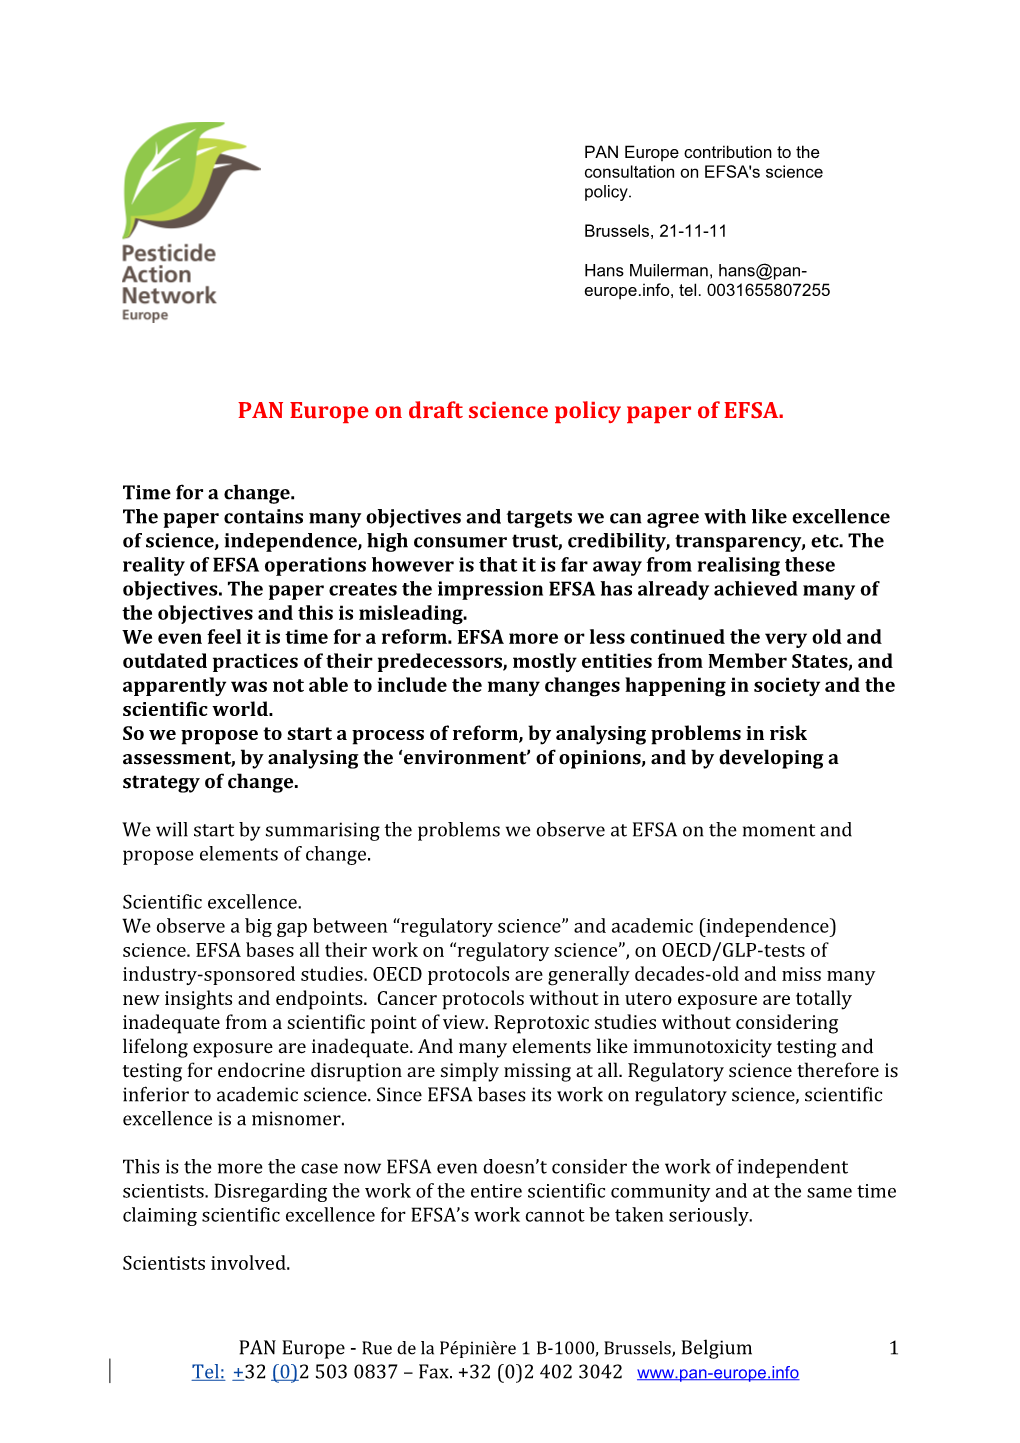 PAN Europe on Draft Science Policy Paper of EFSA